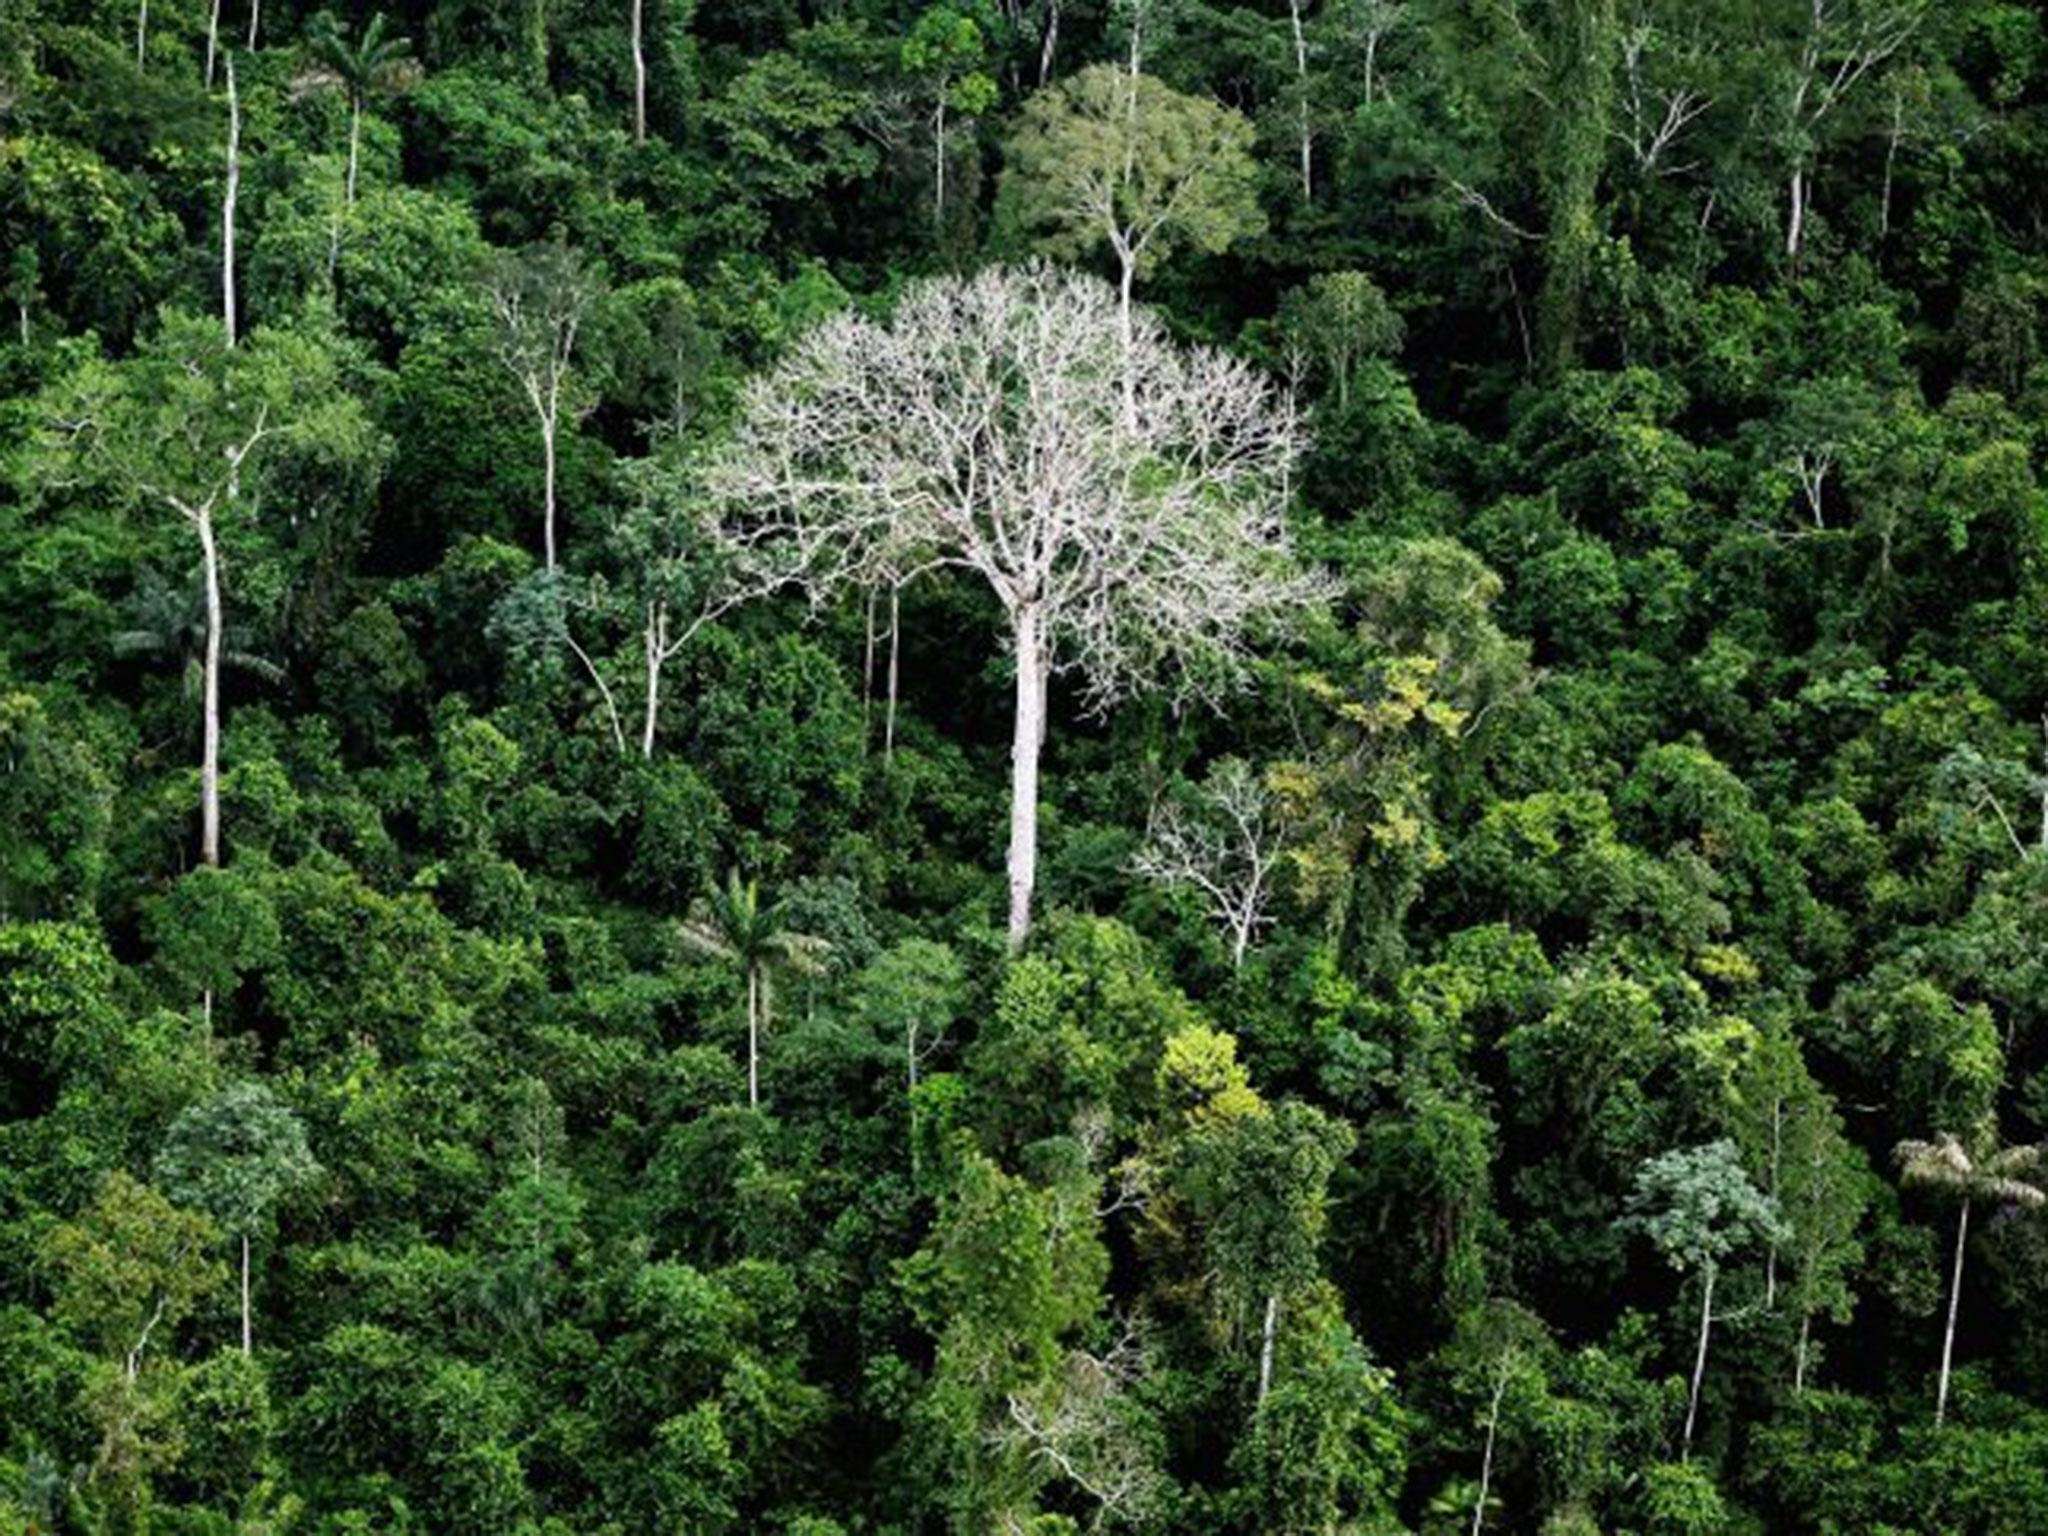 image for Brazil to open up 860,000 acres of protected Amazon rainforest to logging, mining and farming